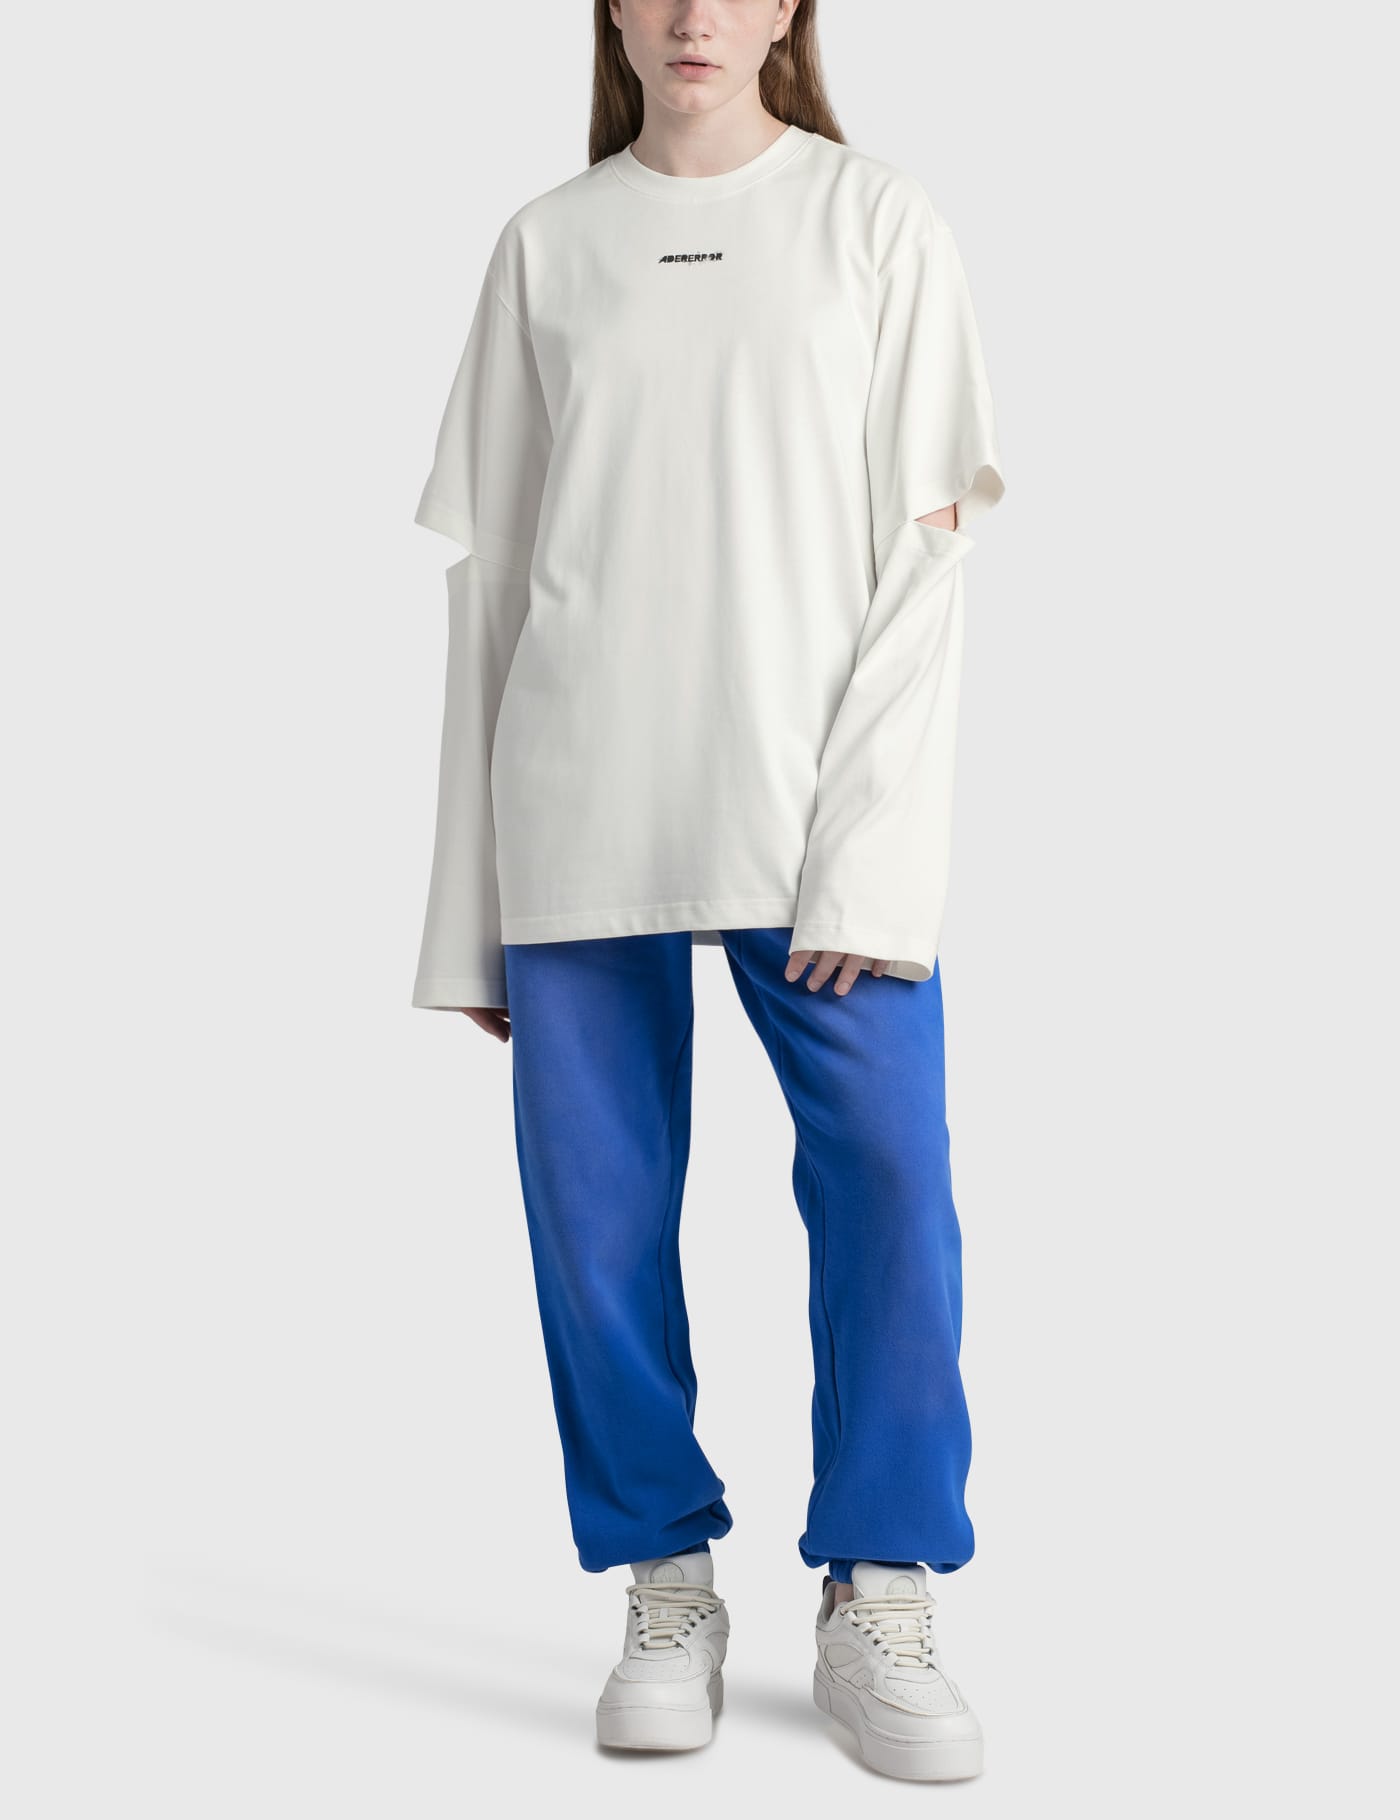 Ader Error - Obe Long Sleeve T-shirt | HBX - Globally Curated 